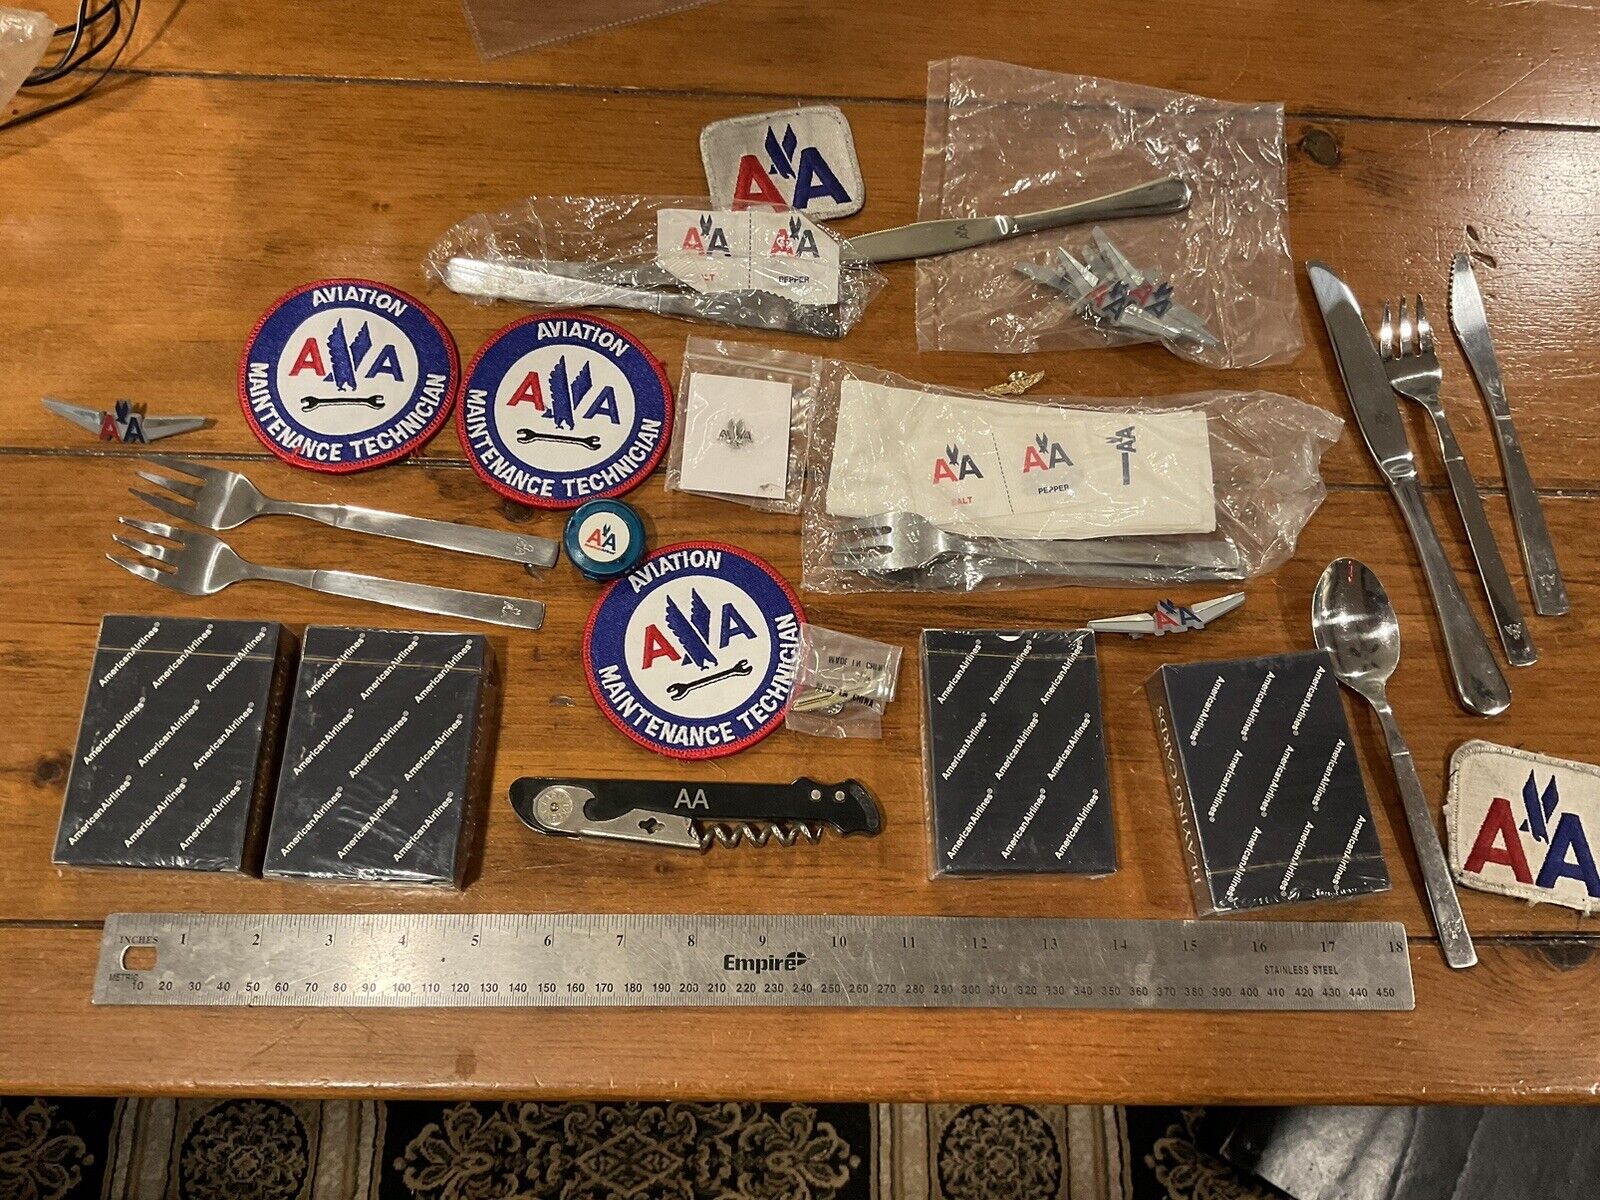 ORIGINAL VINTAGE AA AMERICAN AIRLINES PINS / PATCHES ETC FROM EMPLOYEE